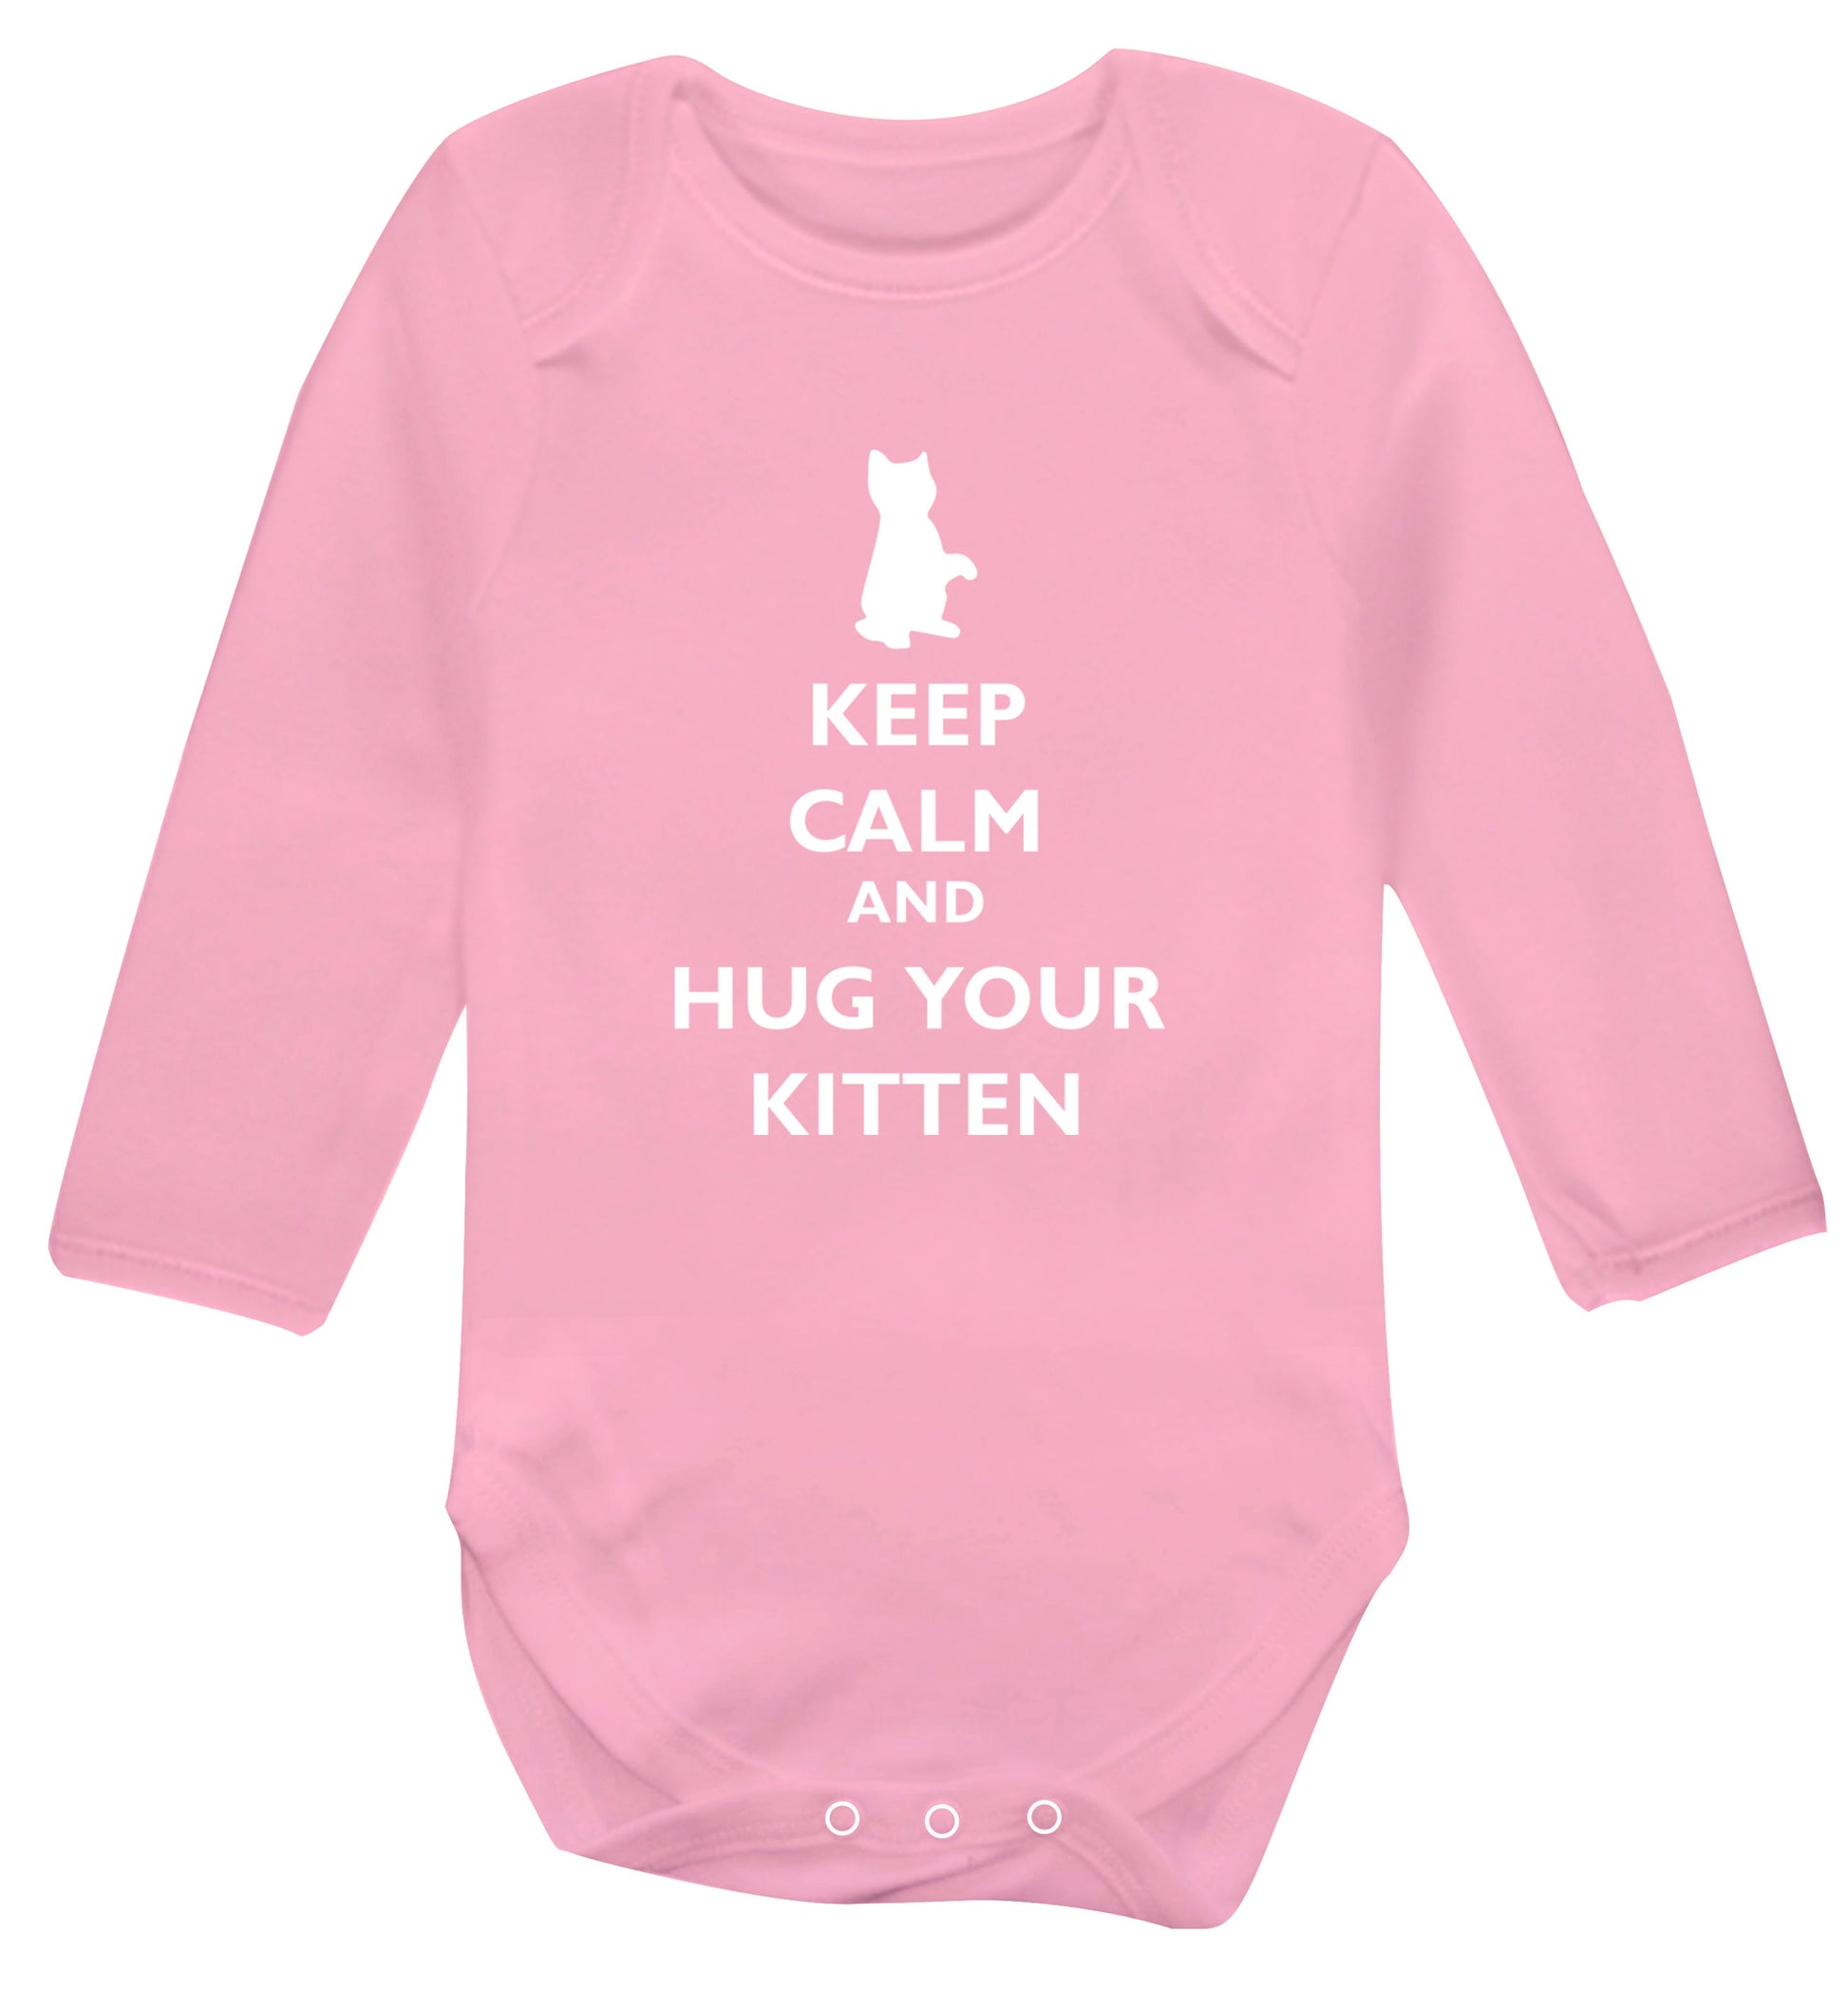 Keep calm and hug your kitten Baby Vest long sleeved pale pink 6-12 months